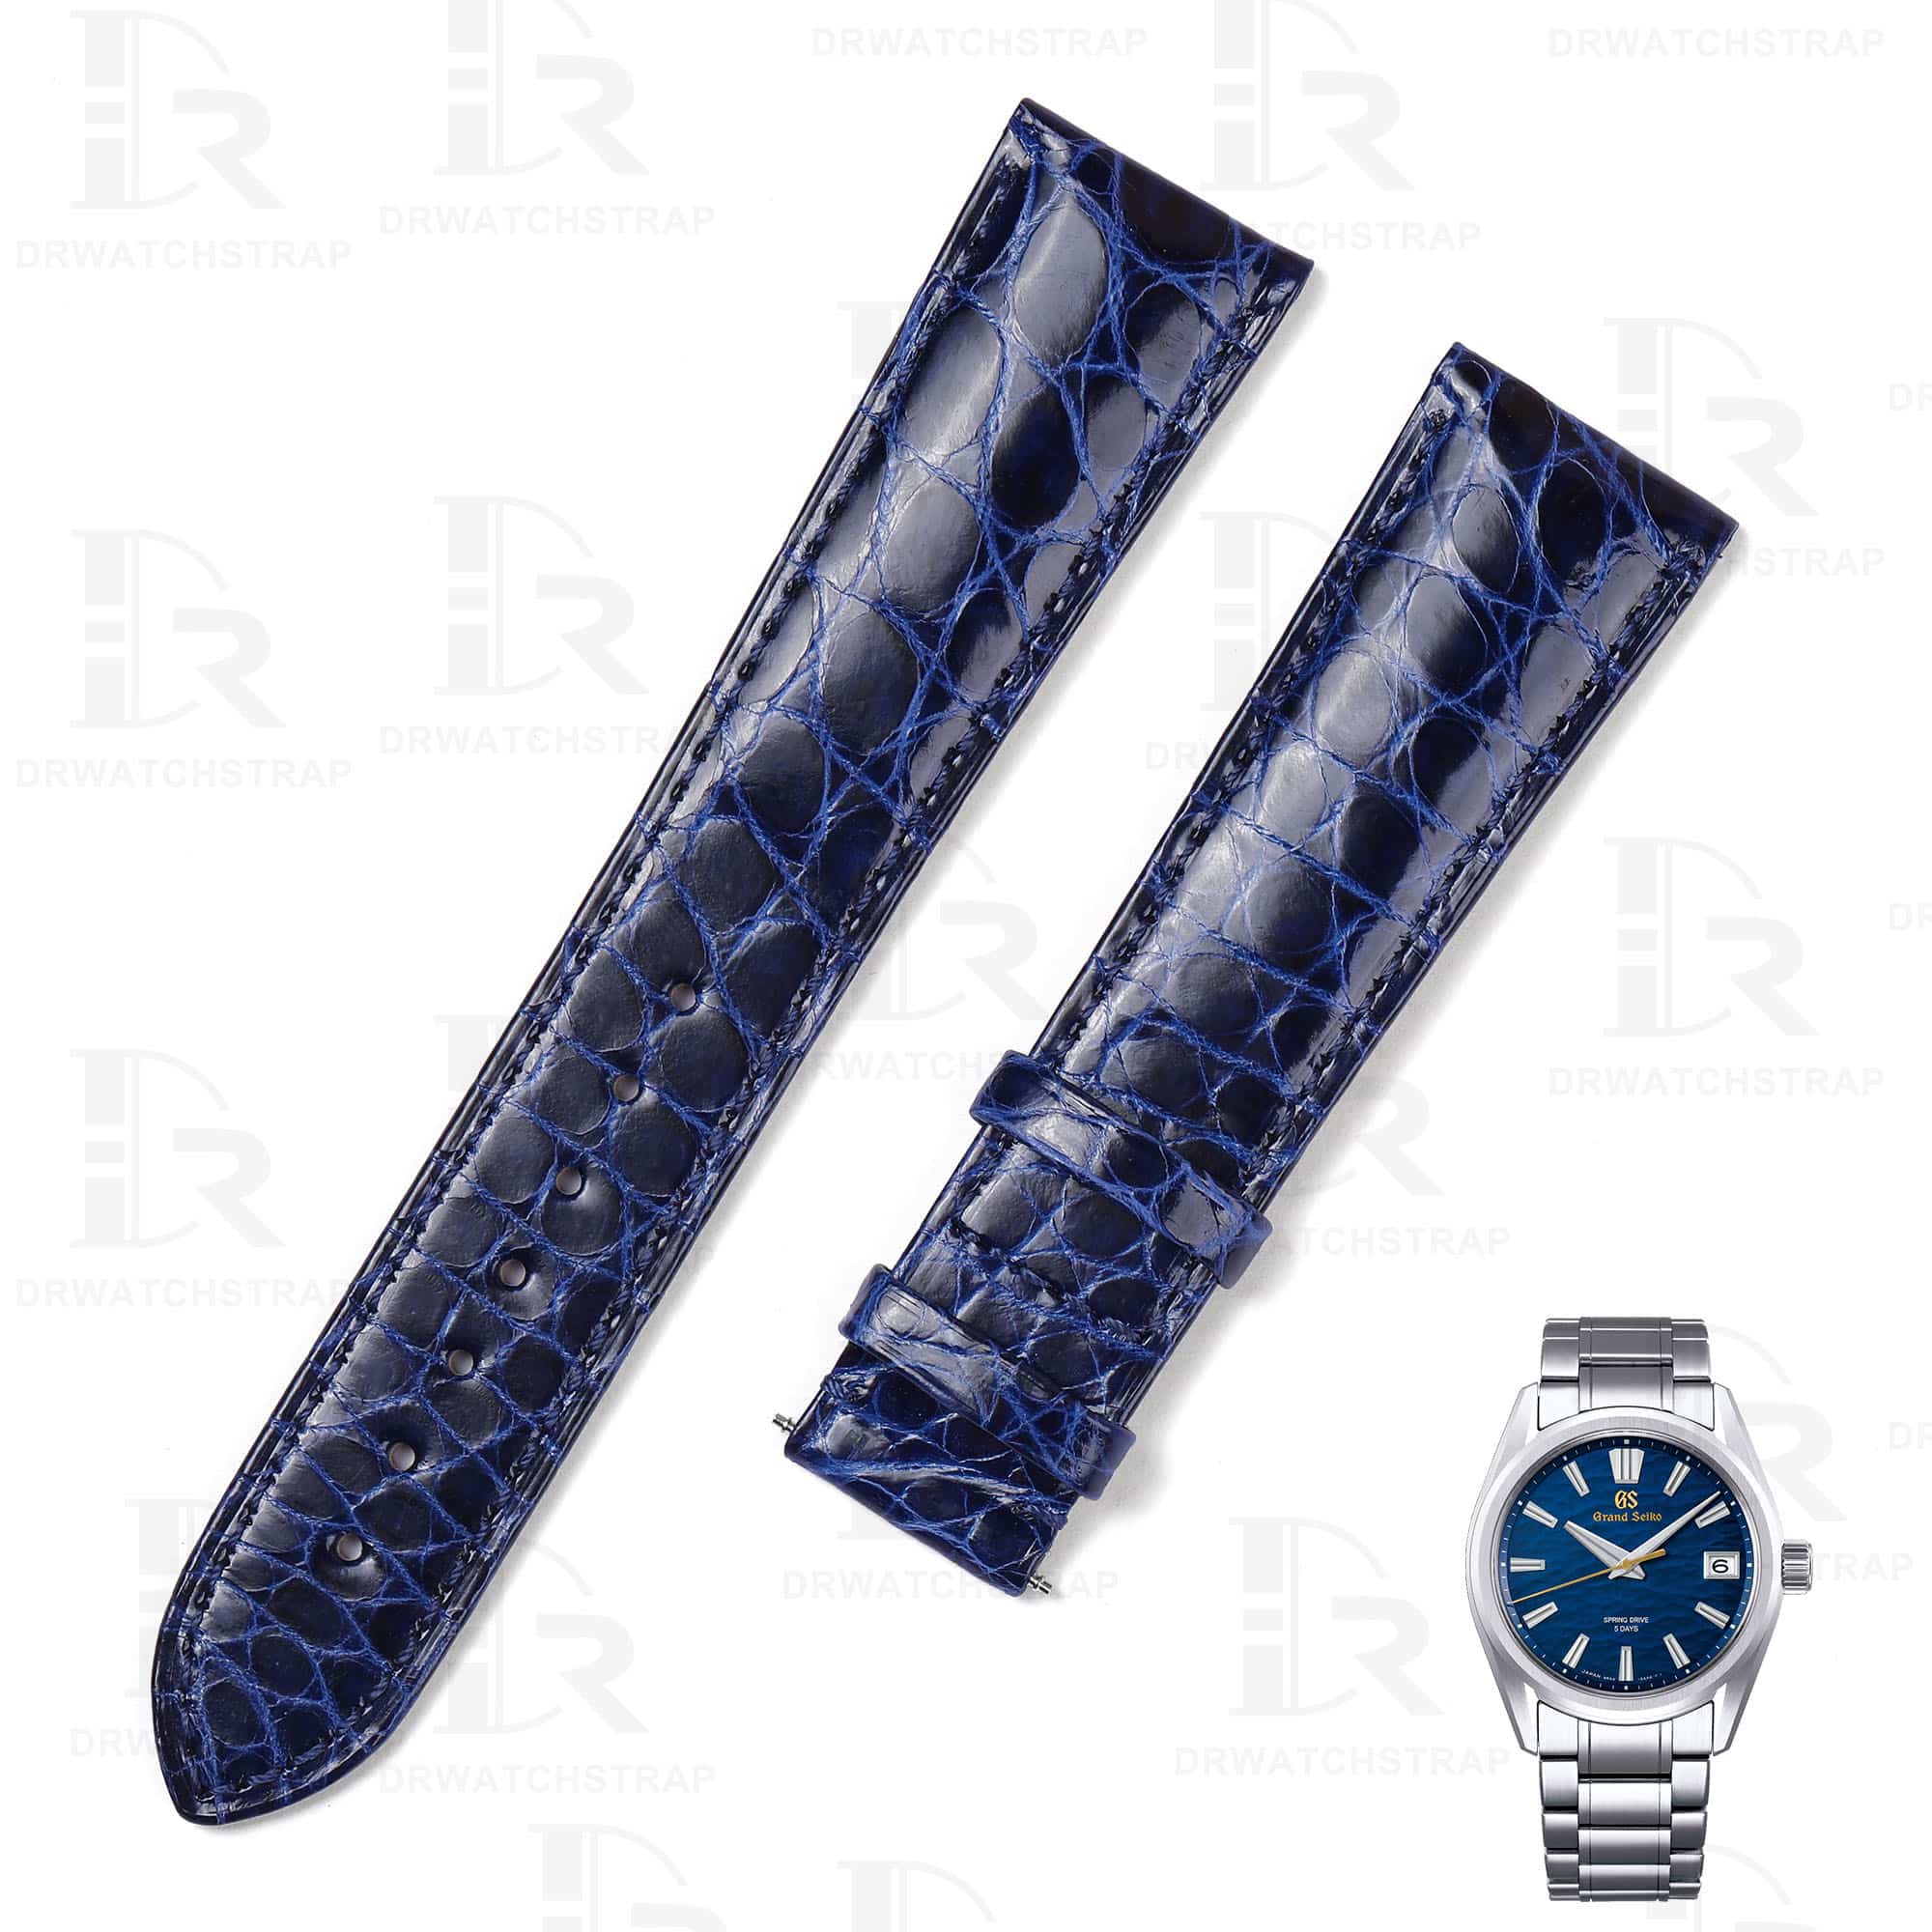 Custom Grand Seiko Heritage Collection Blue leather Watch band 22mm handmade for sale (5)